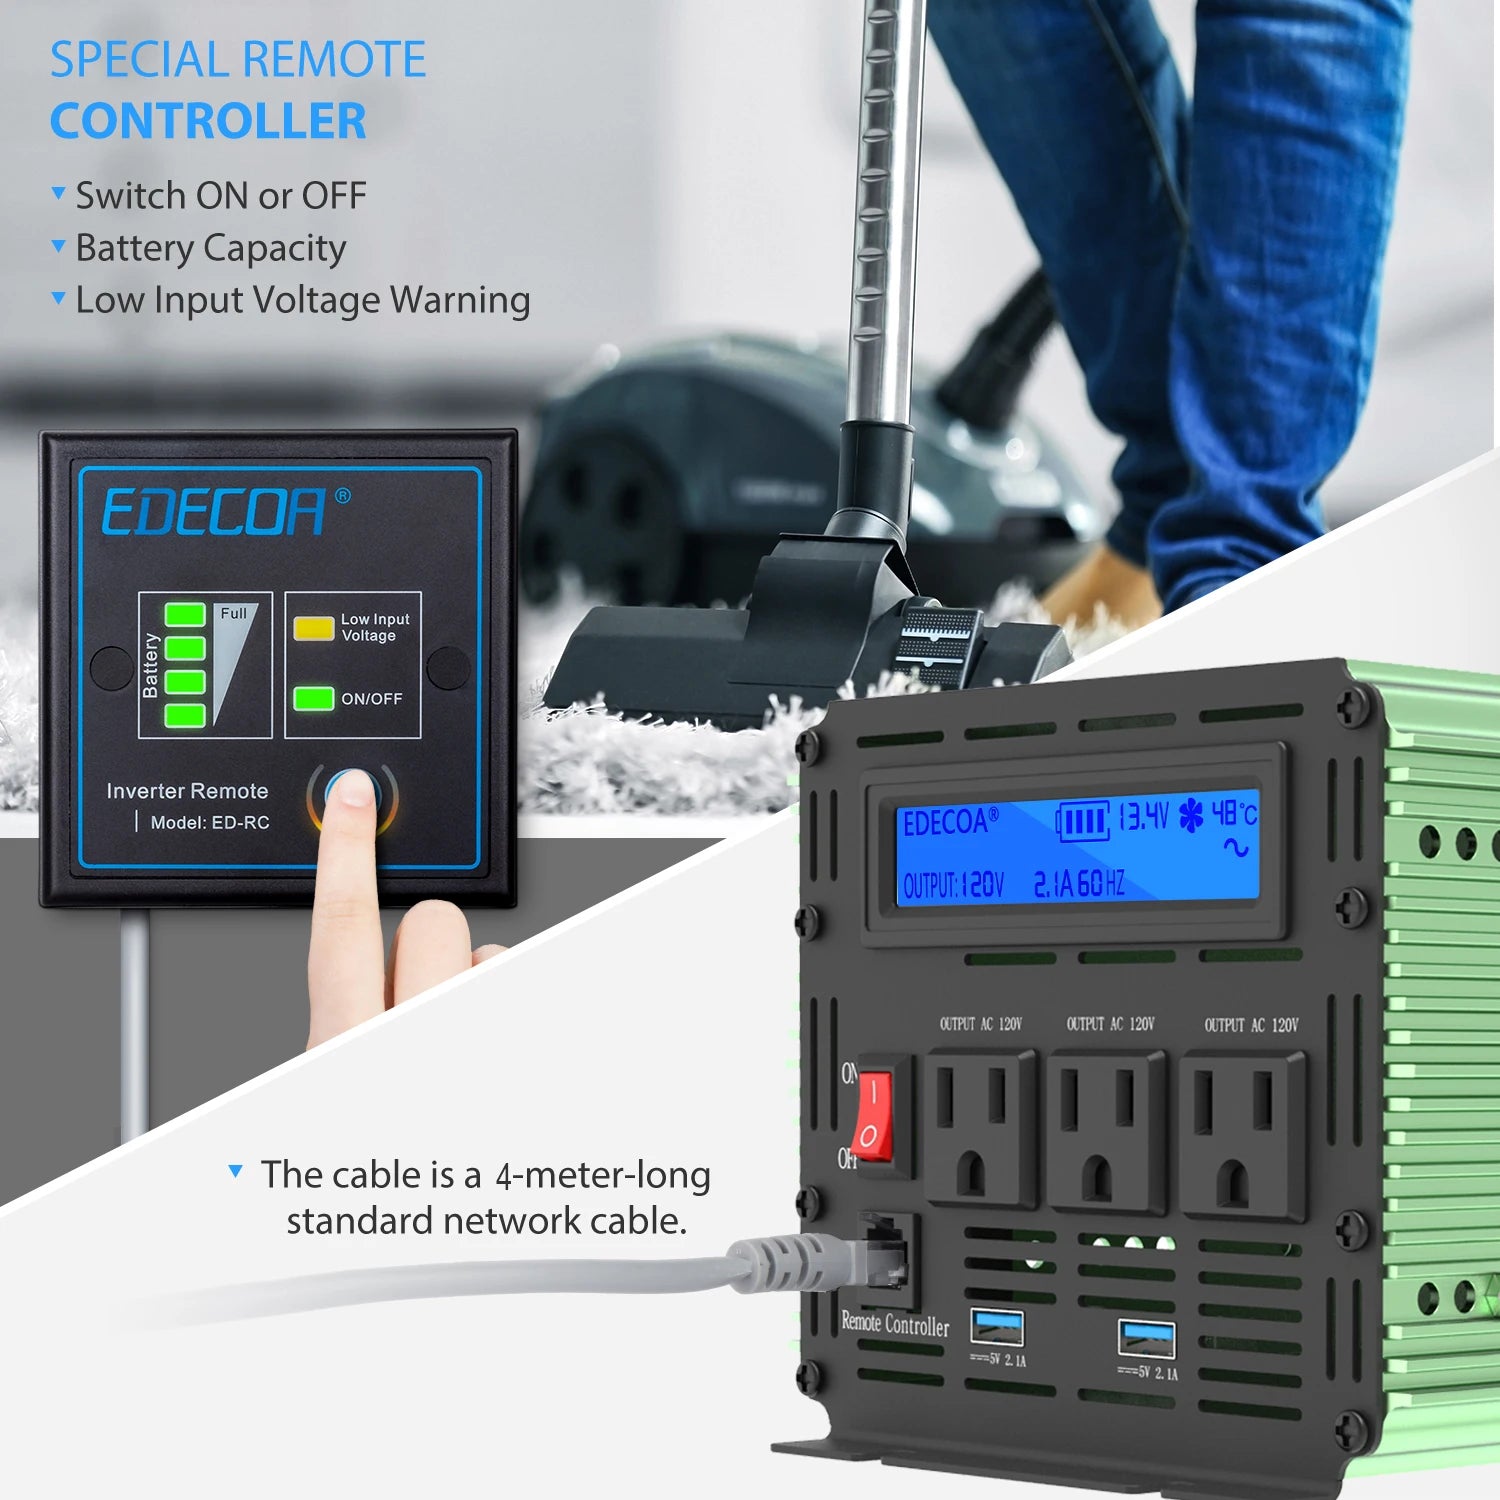 Remote controller for Edecoa inverter with switching, monitoring, and warning features.